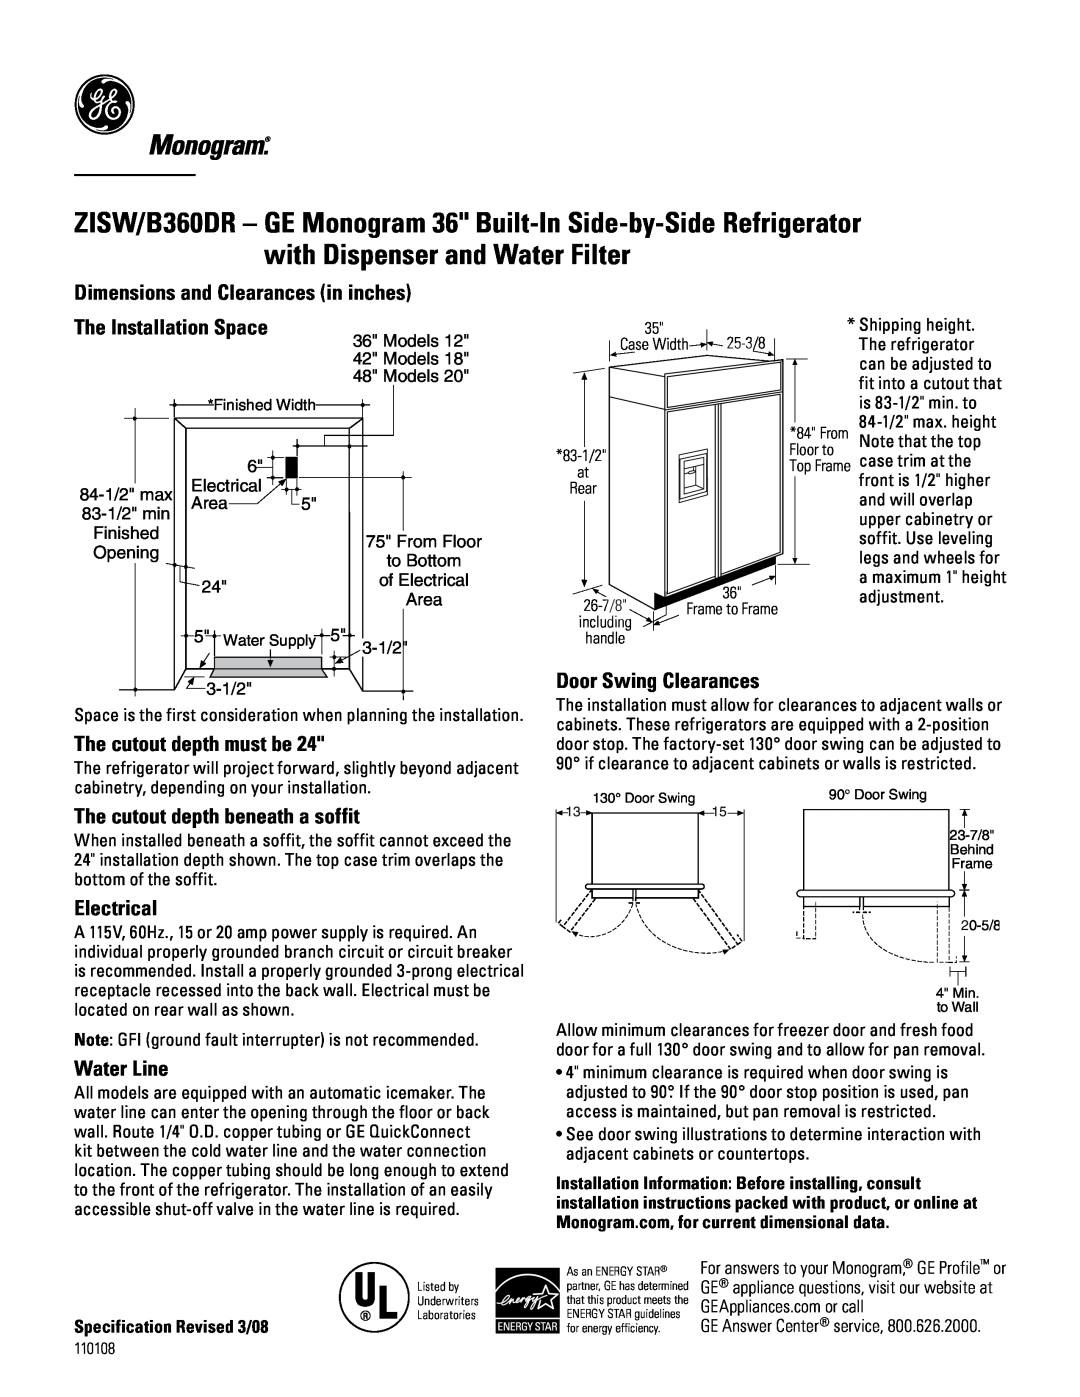 GE ZISW/B360DR dimensions Dimensions and Clearances in inches, The cutout depth must be, Door Swing Clearances, Electrical 